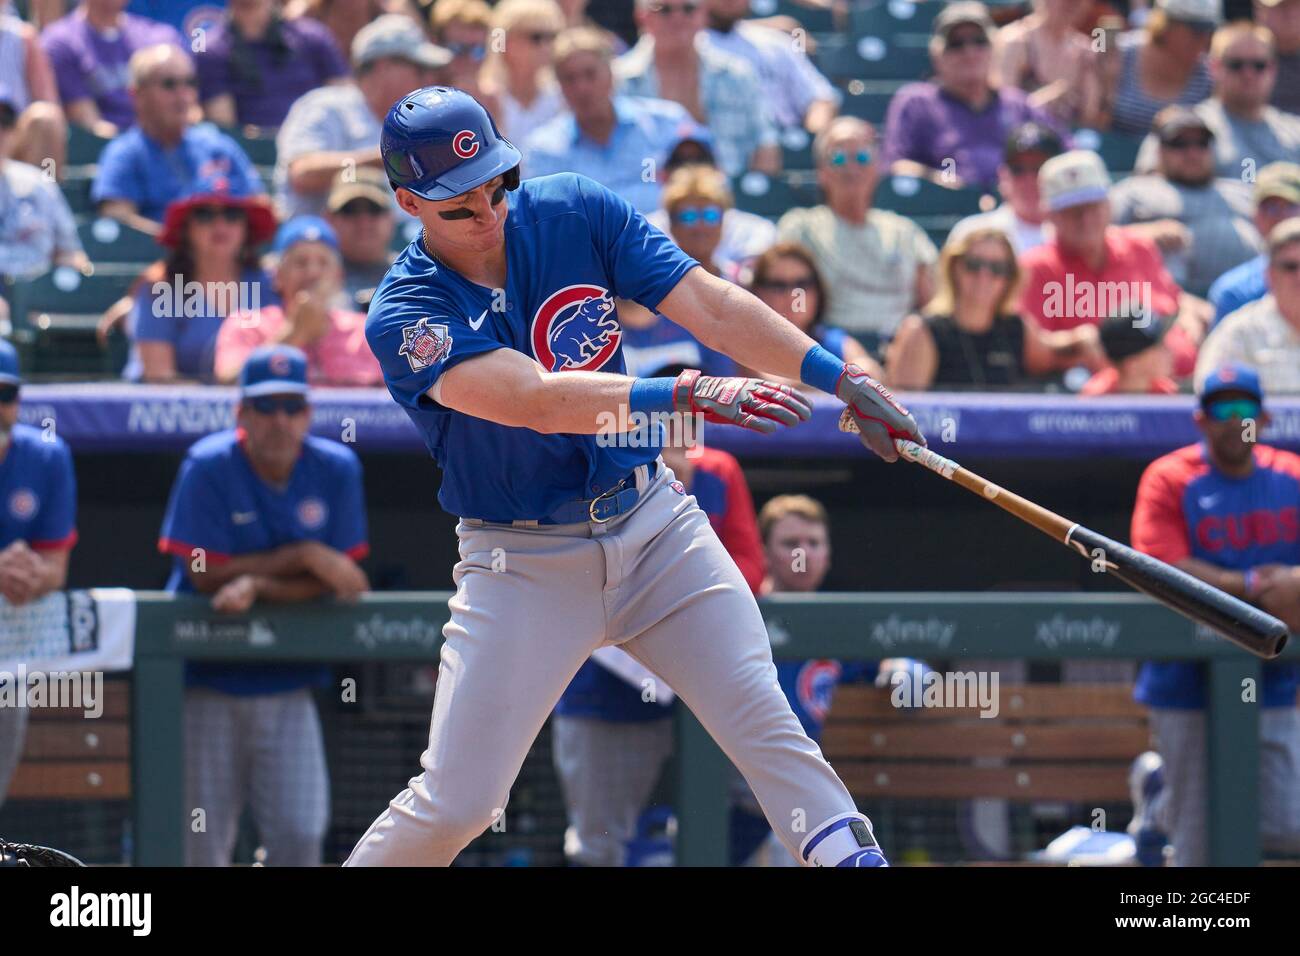 August 5 2021: Chicago Cubs Frank Schwindel (18) gets a hit during